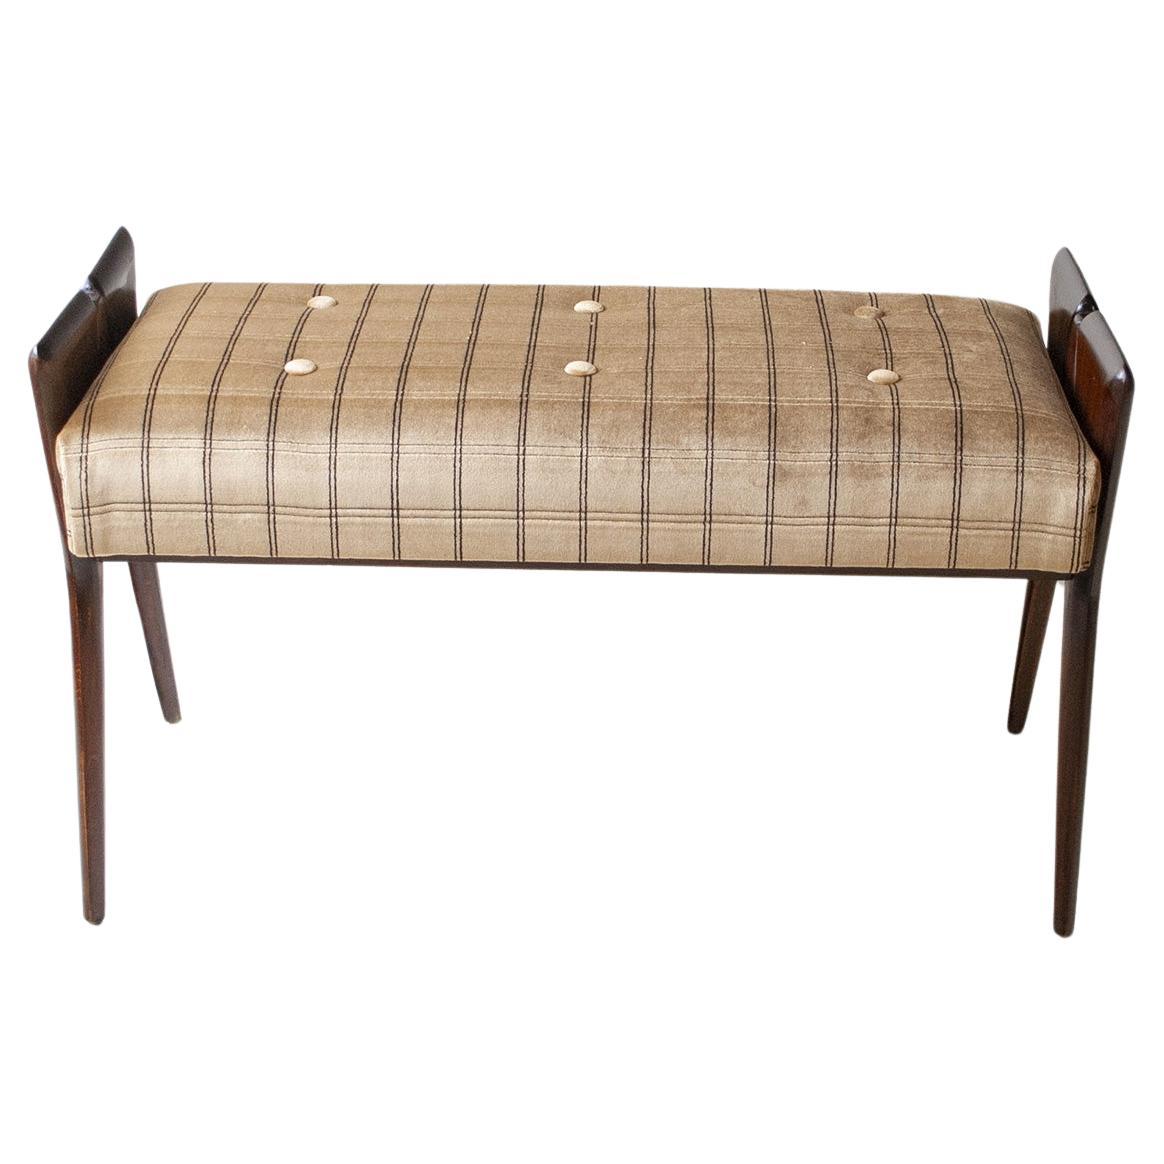 Ico Parisi Italian Midcentury Bench from the Fifties For Sale